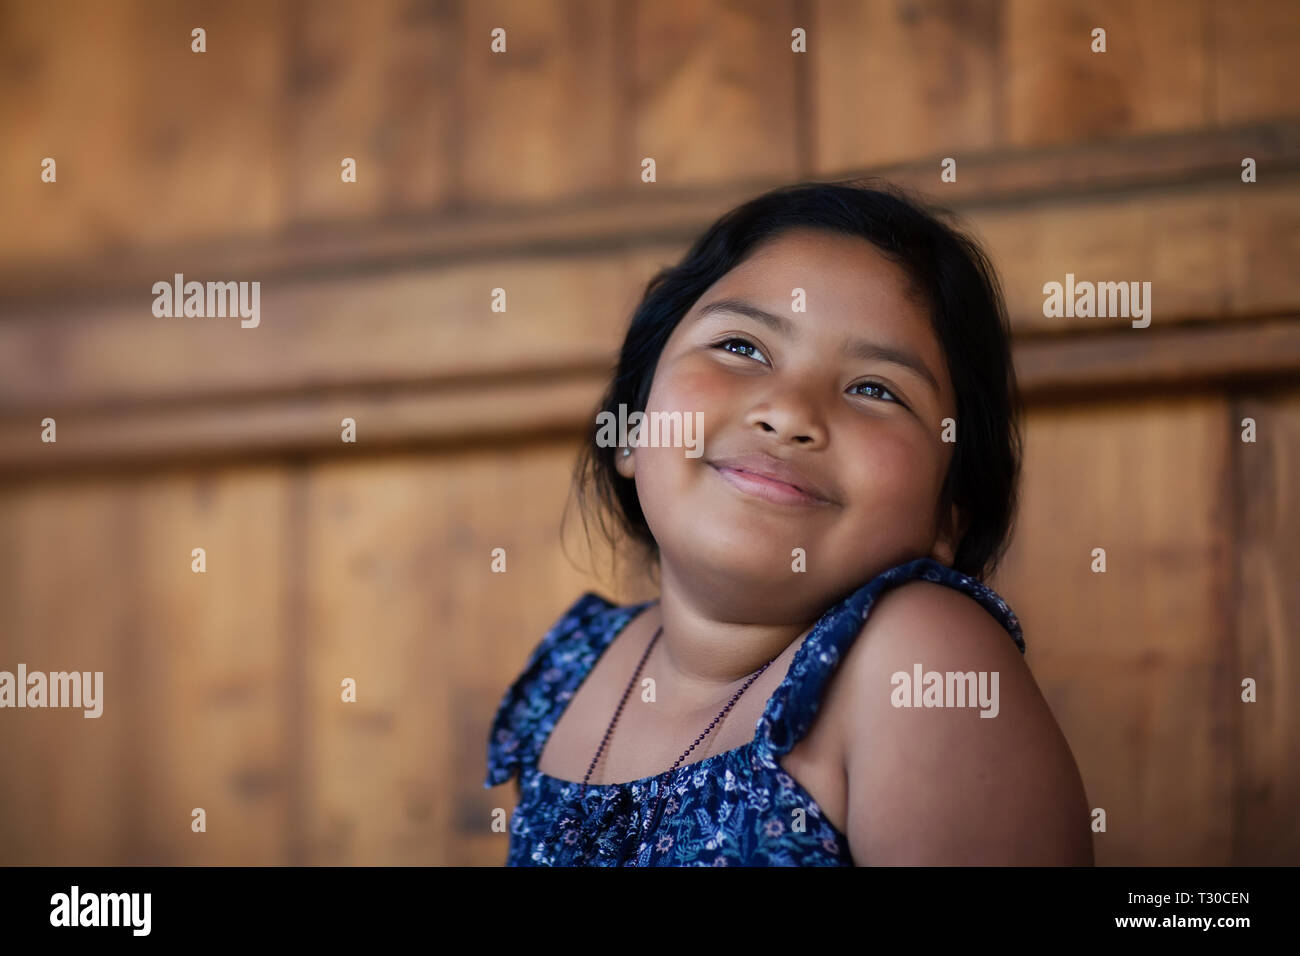 Young ethnic girl remembering a happy moment in her mind and expressing joy through a smile and bright eyes. Stock Photo